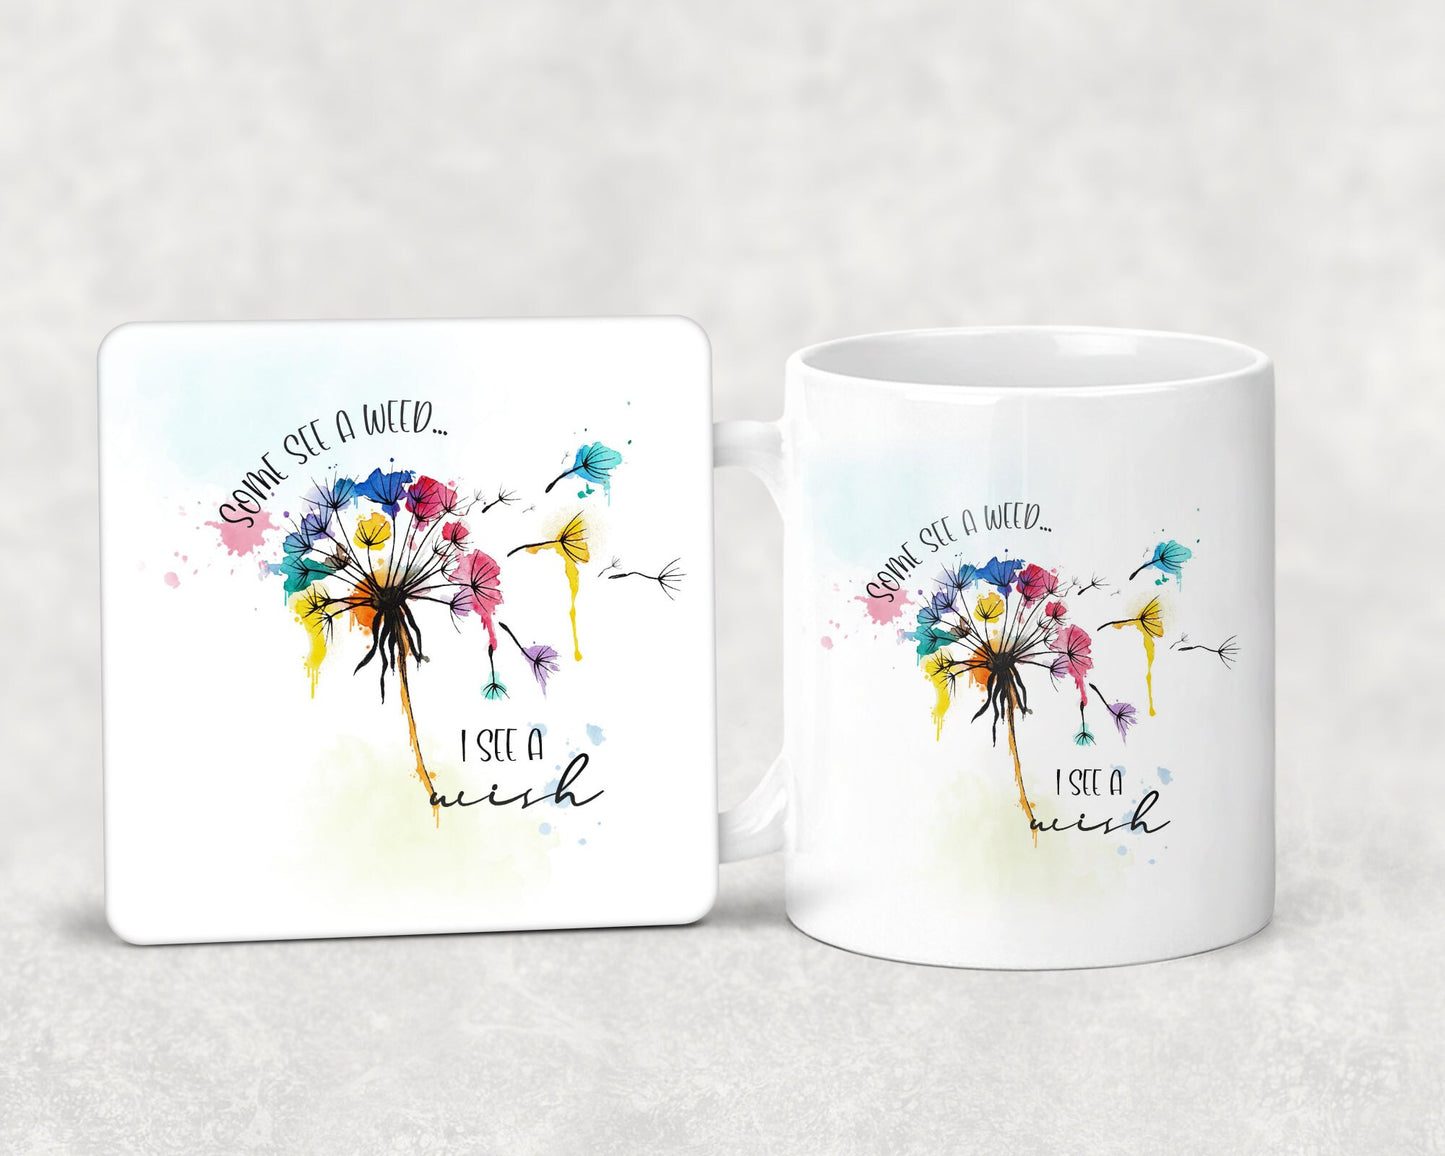 Mug and coaster set that features a bright watercolour dandelion design and the text 'Some see a weed.... I see a wish'